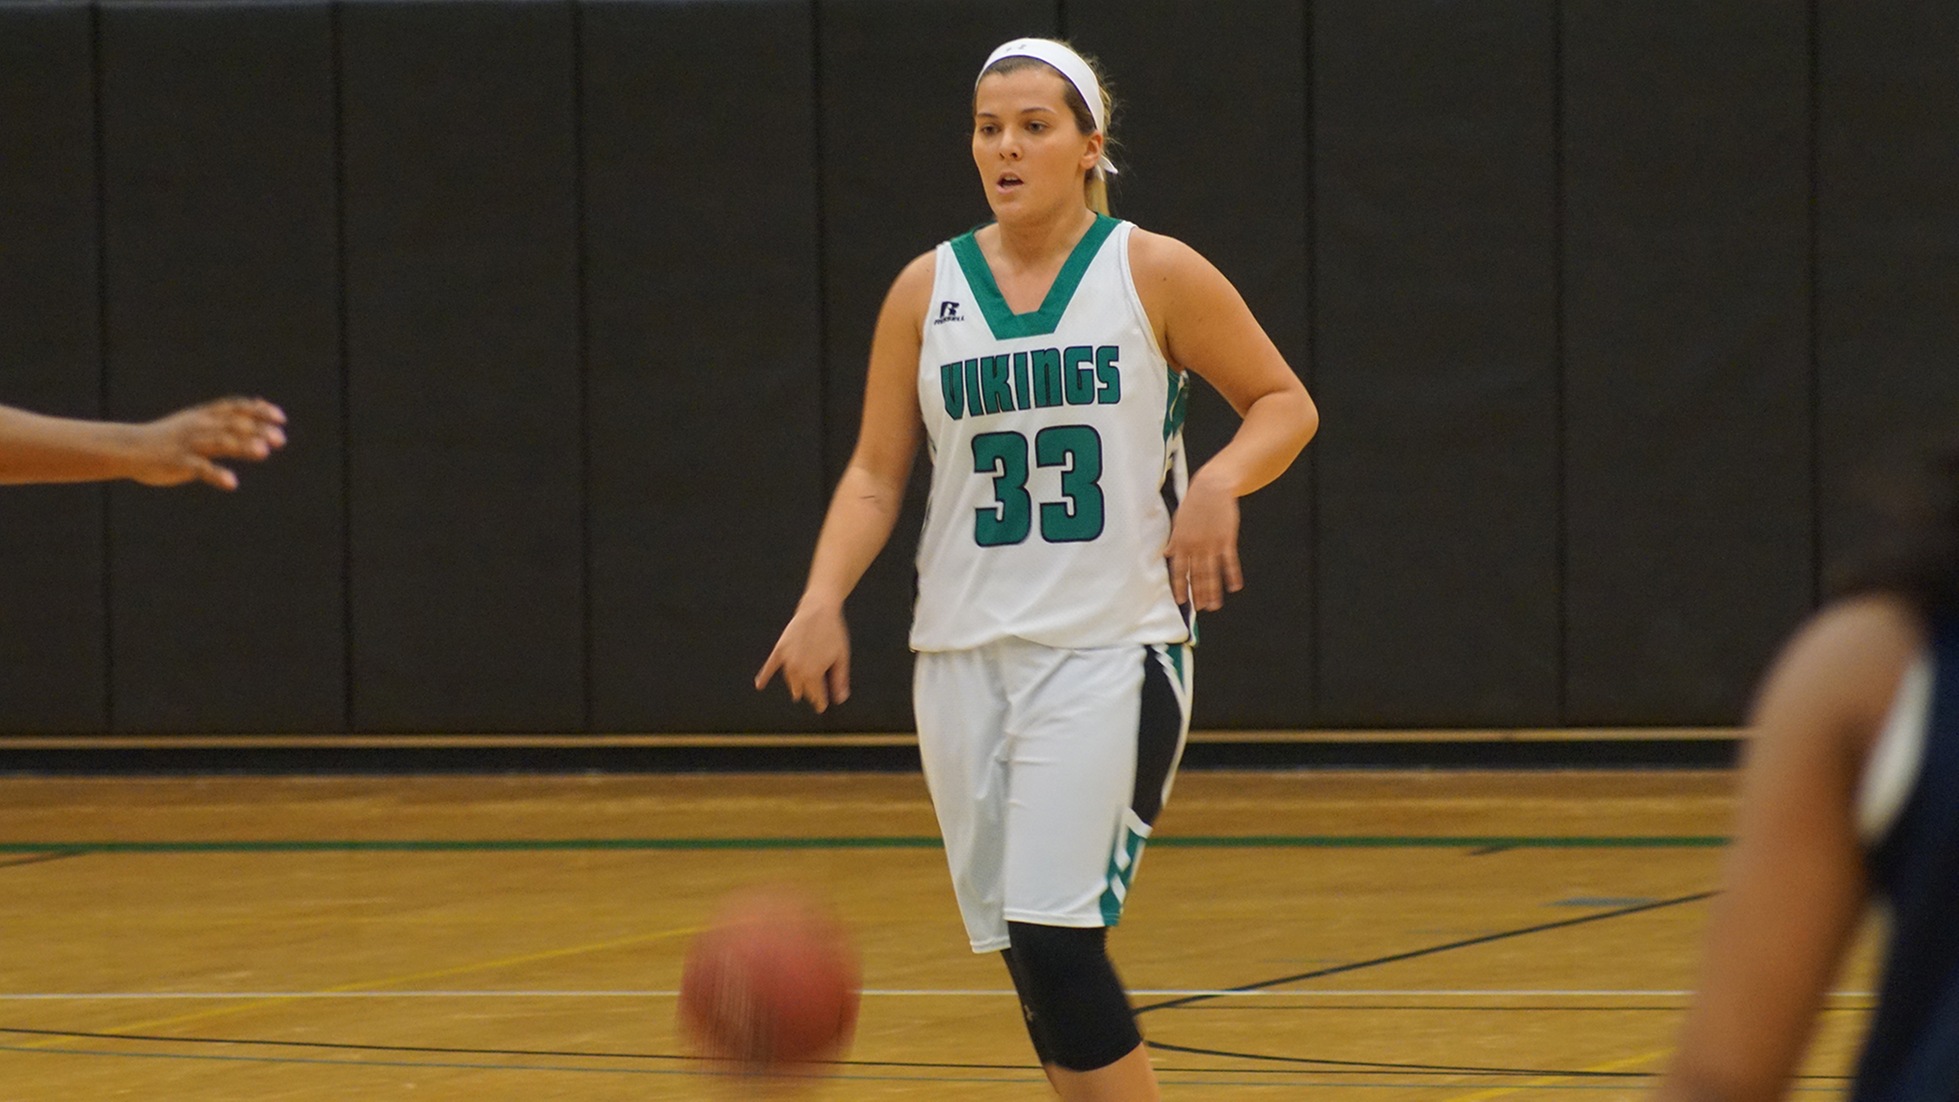 Vikings Women's Hoops Falls to Sussex County CC, 55-48